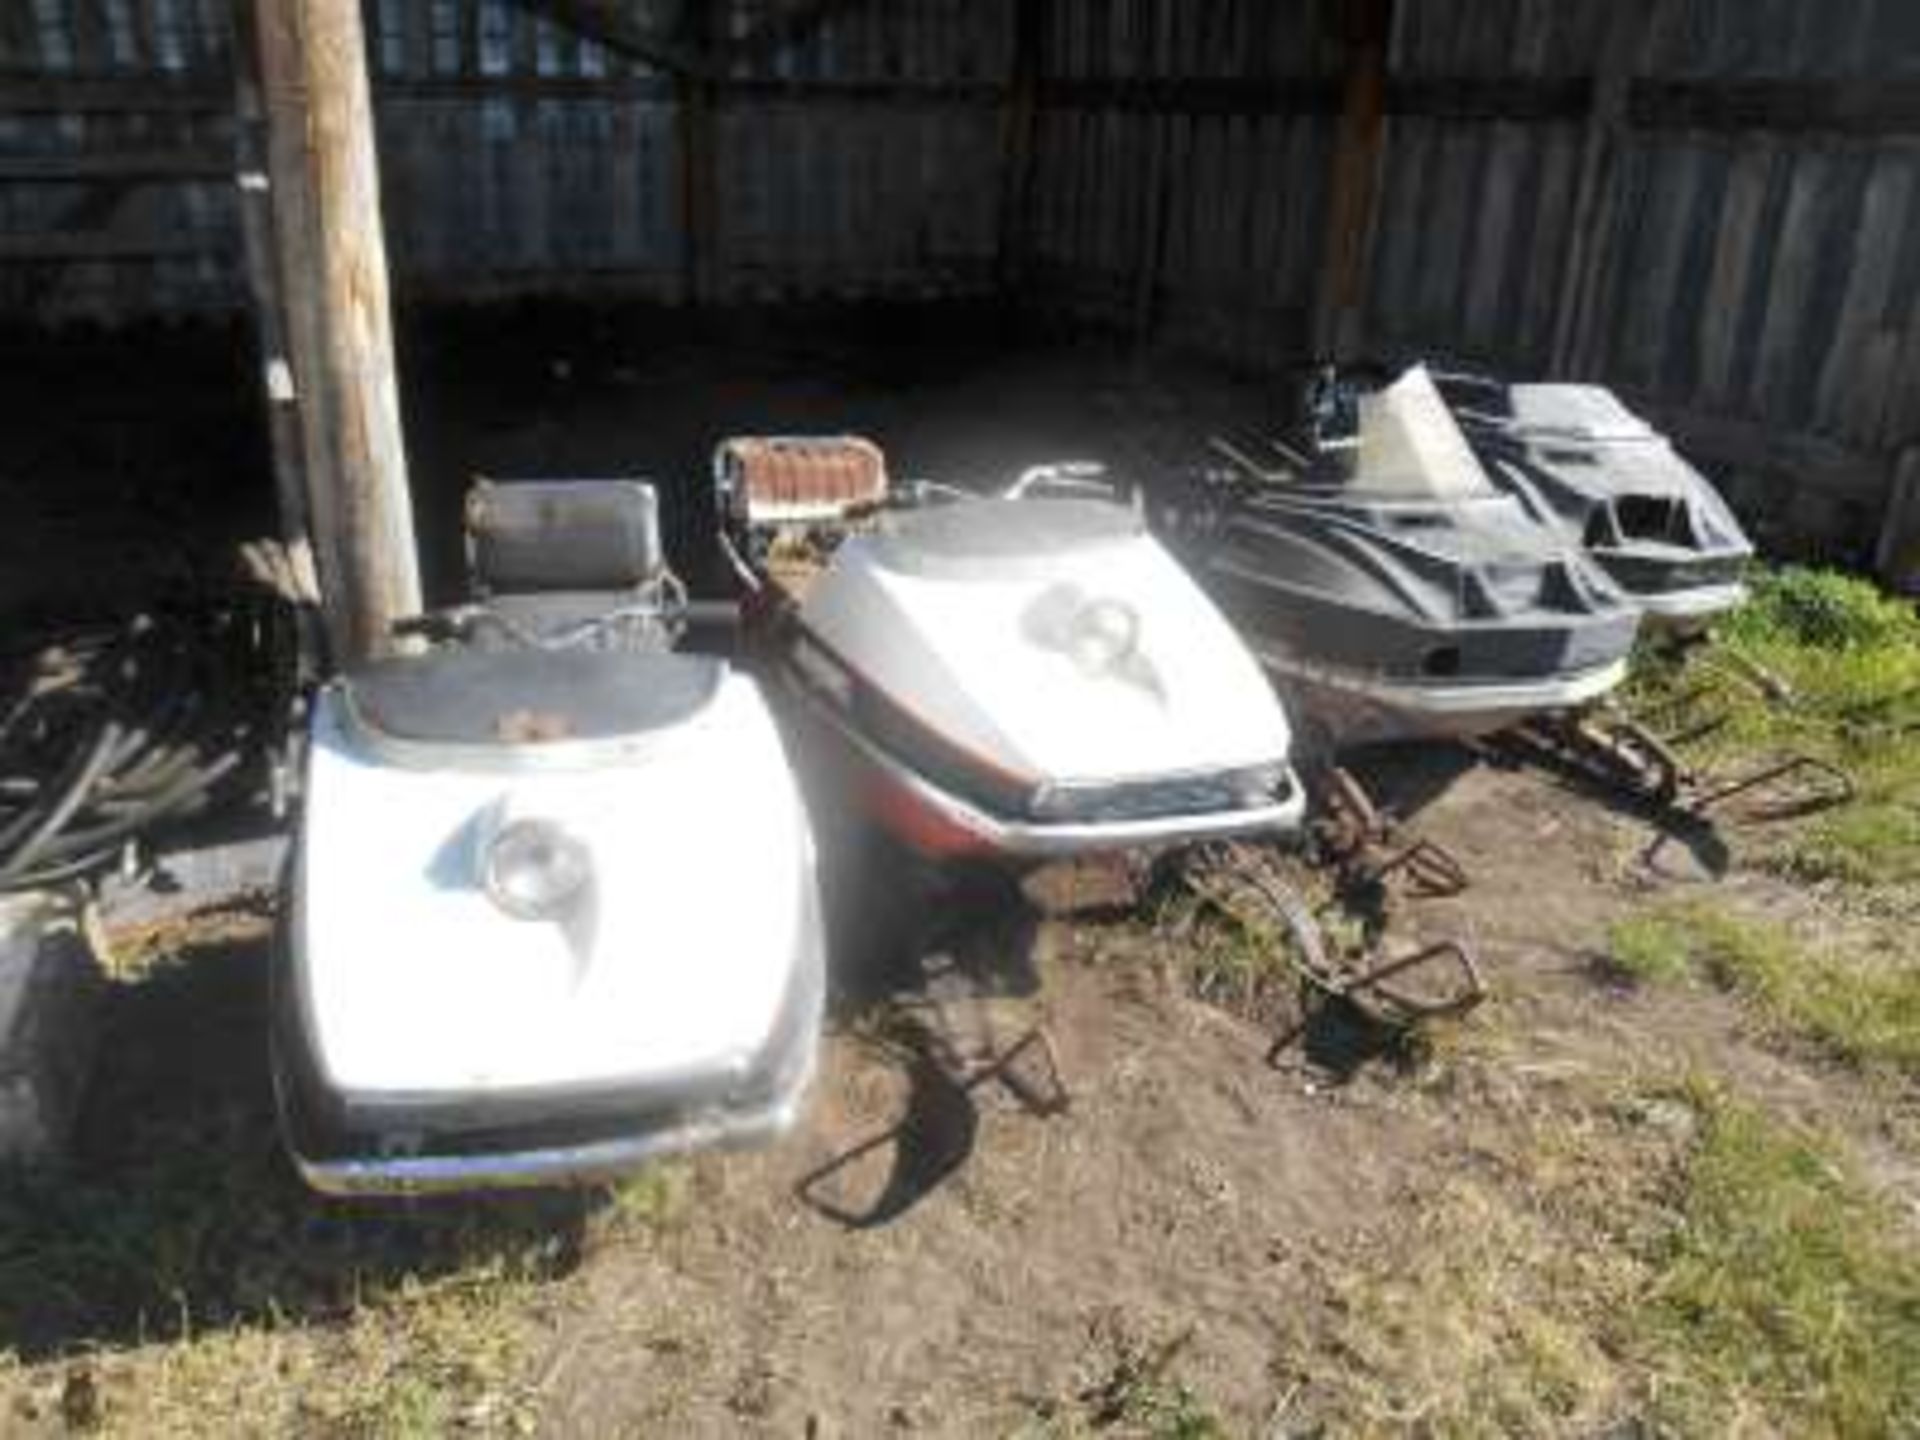 Old snowmobiles (to restore)